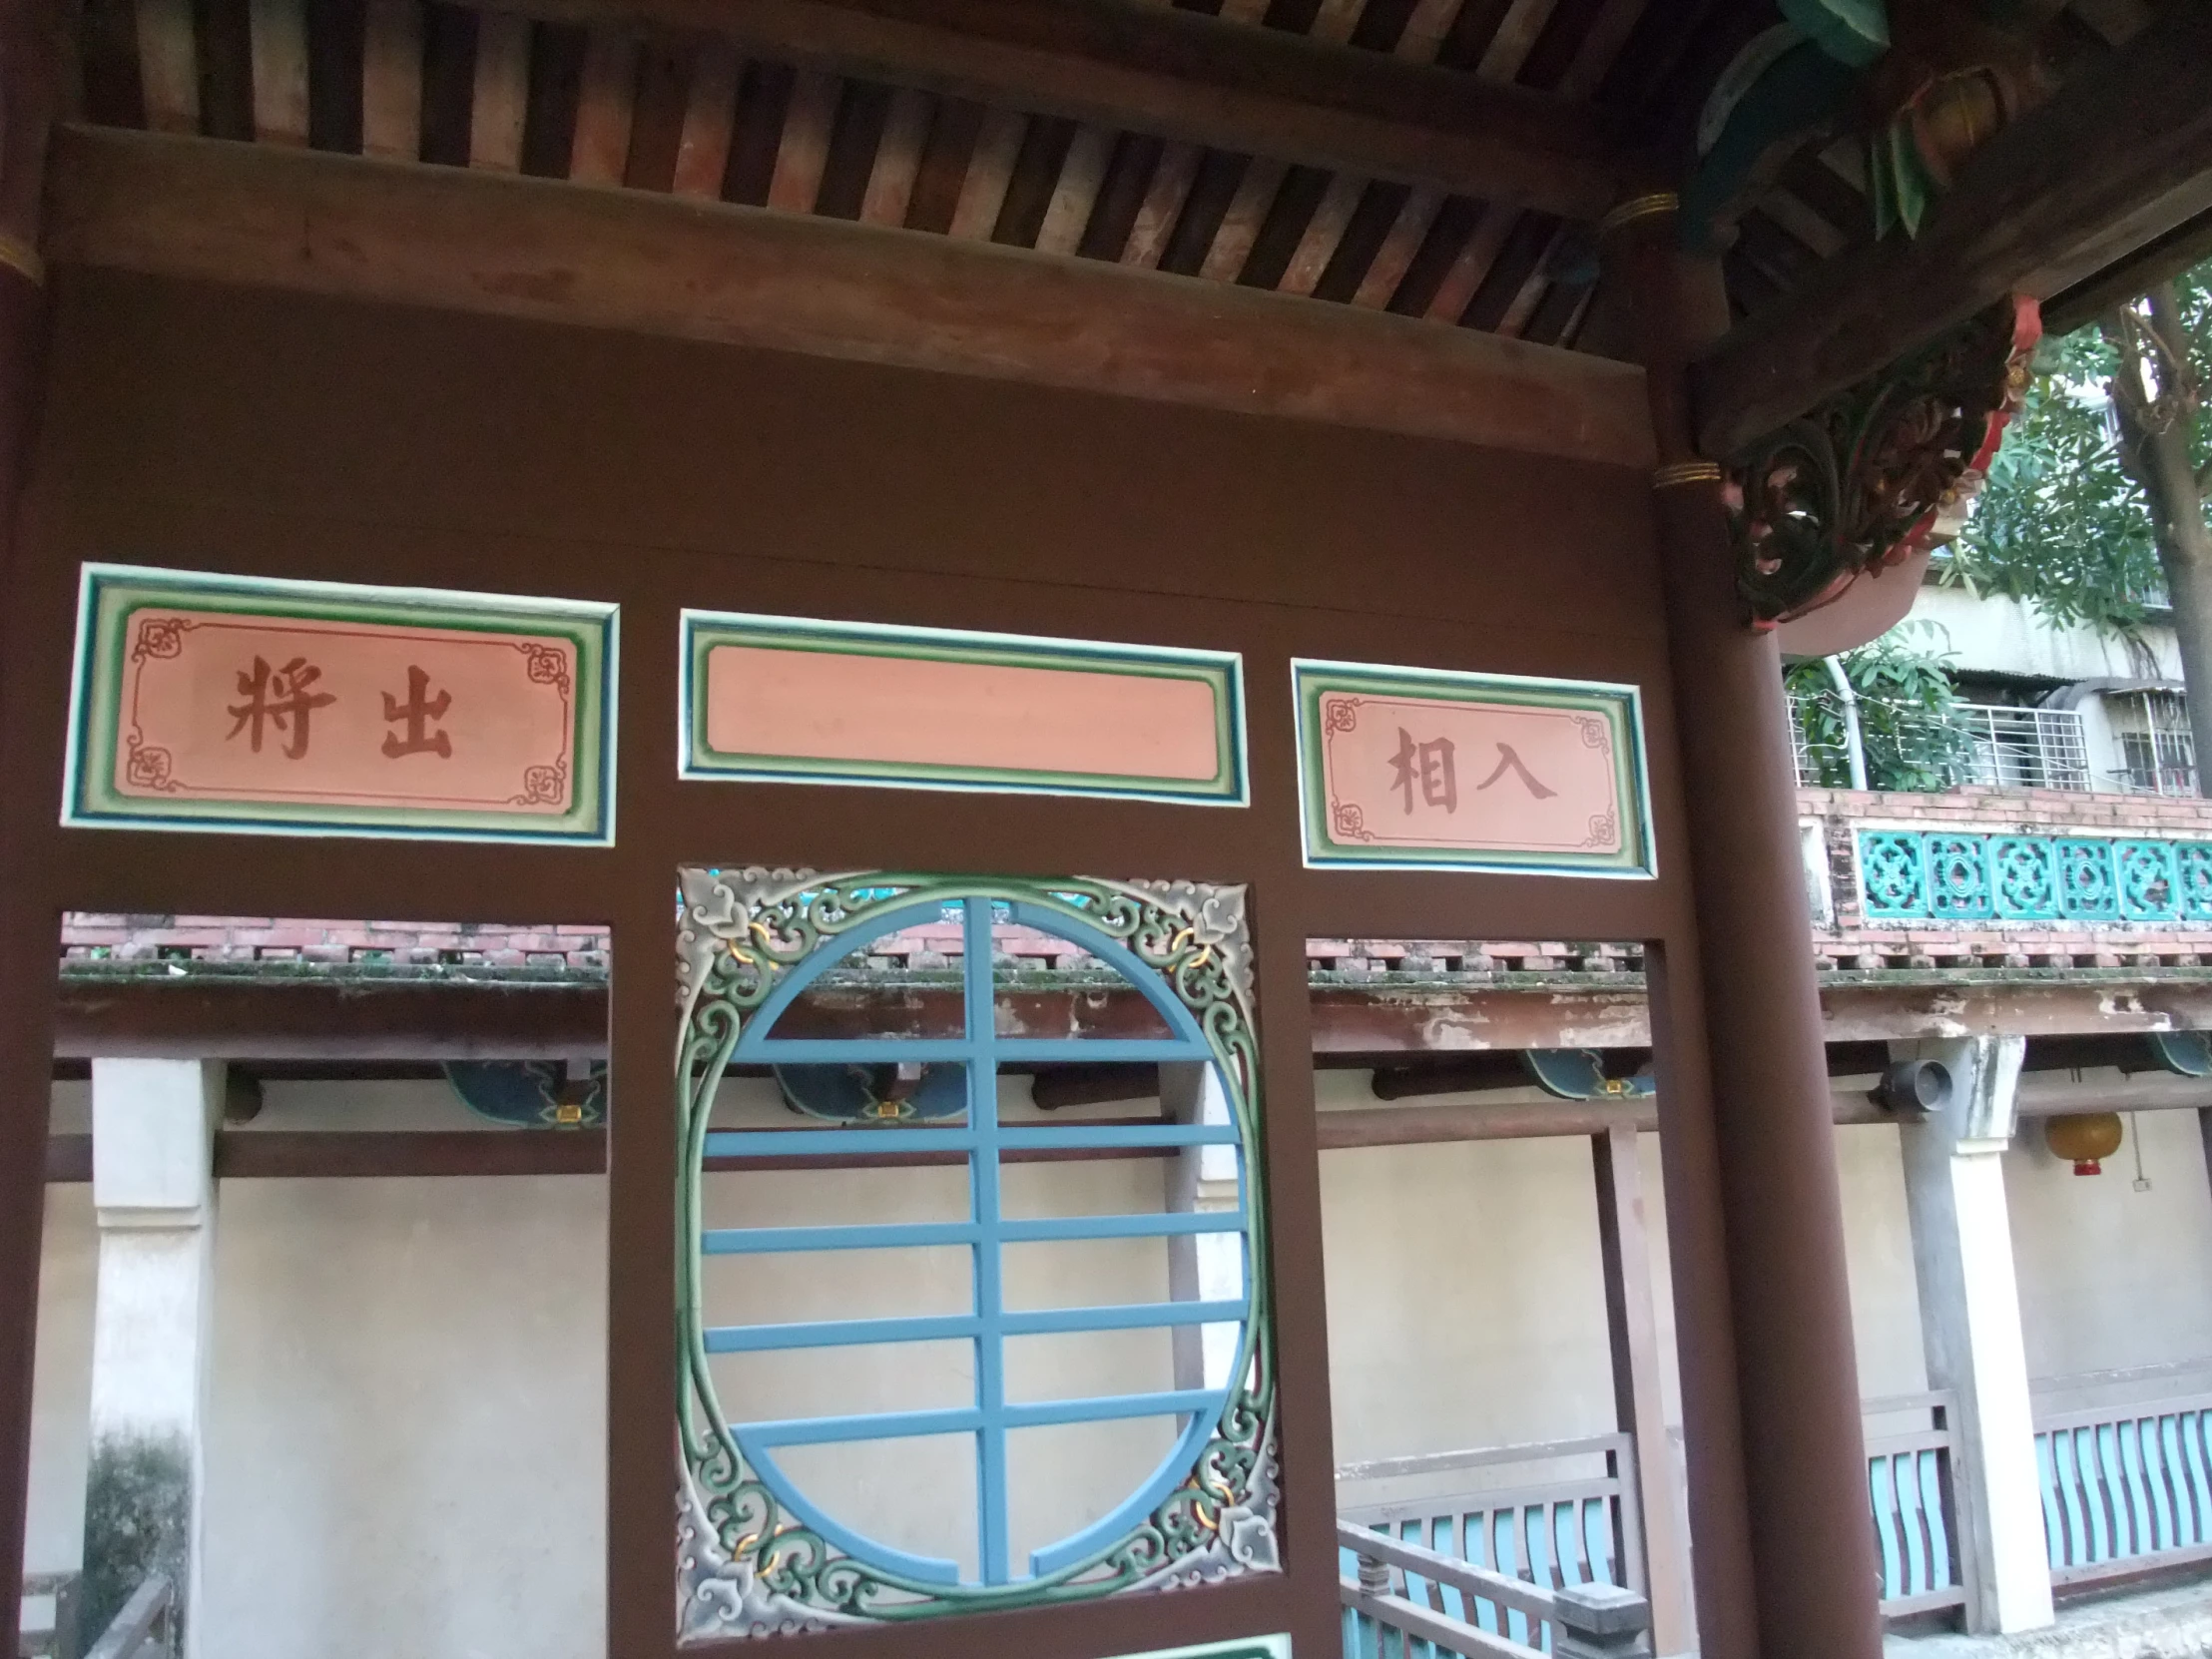 oriental style building with arch and decorative windows